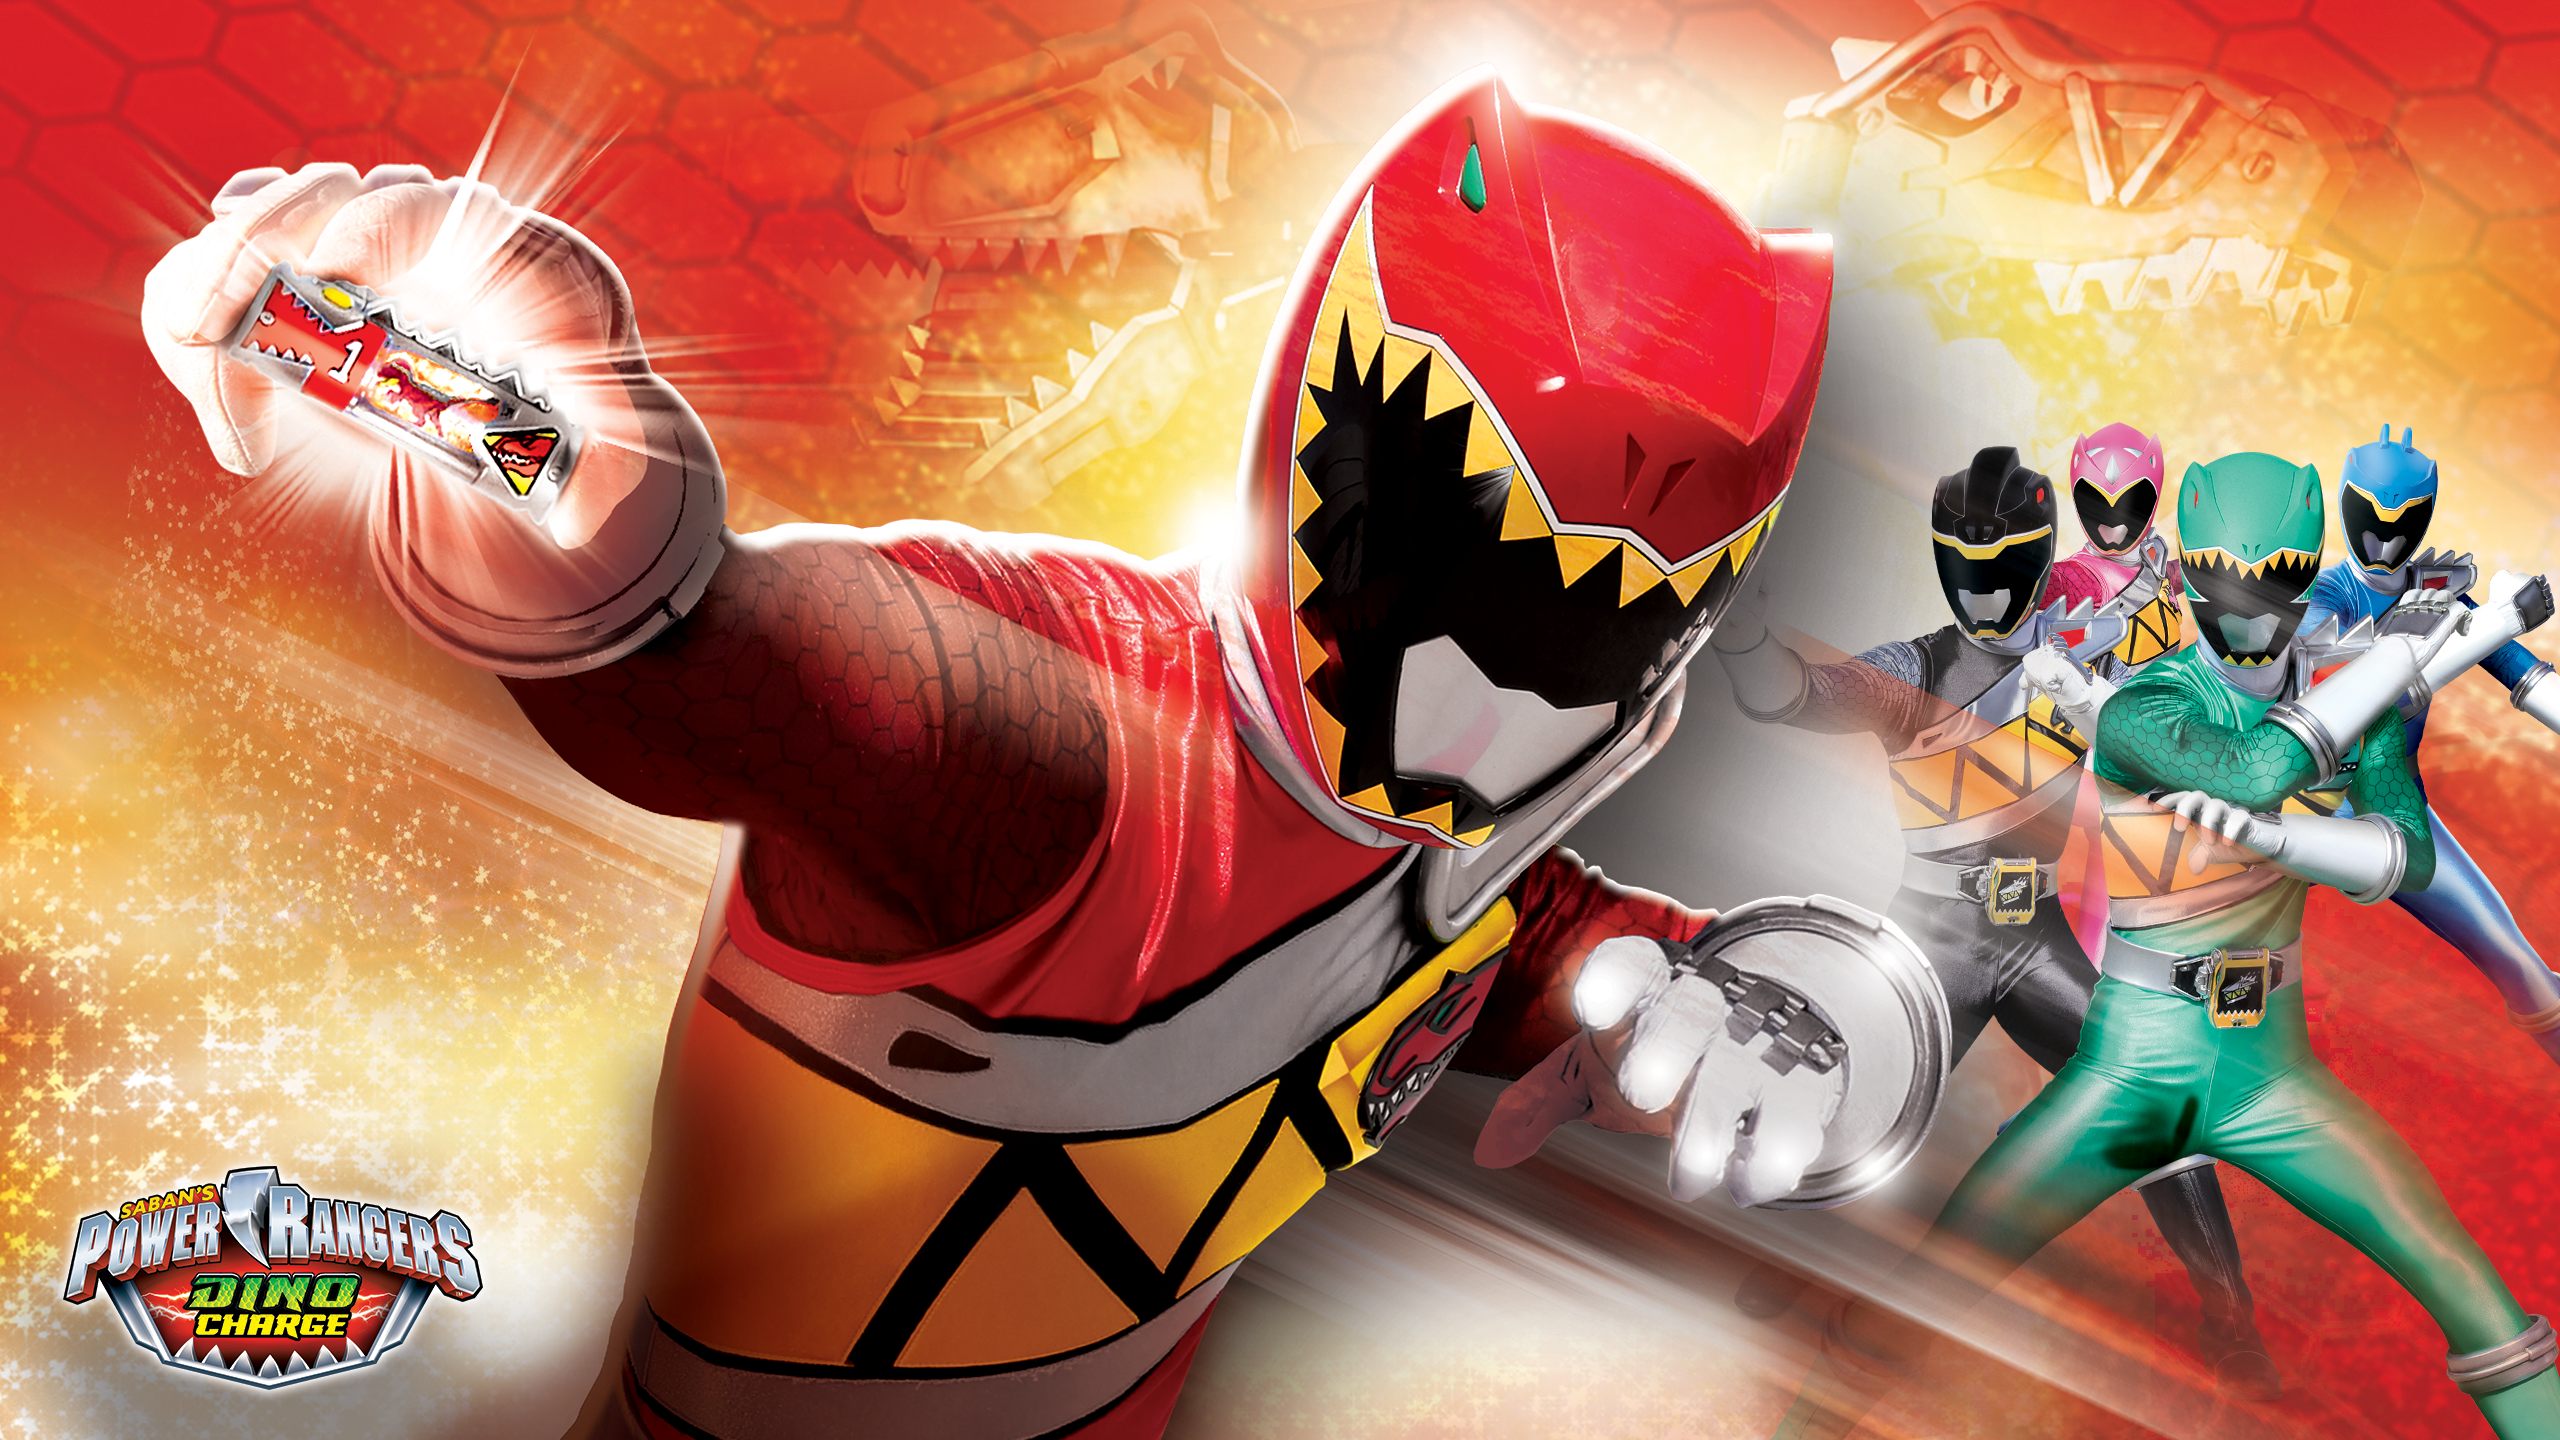 Dino Charge Red Ranger Wallpaper - Power Rangers - The Official